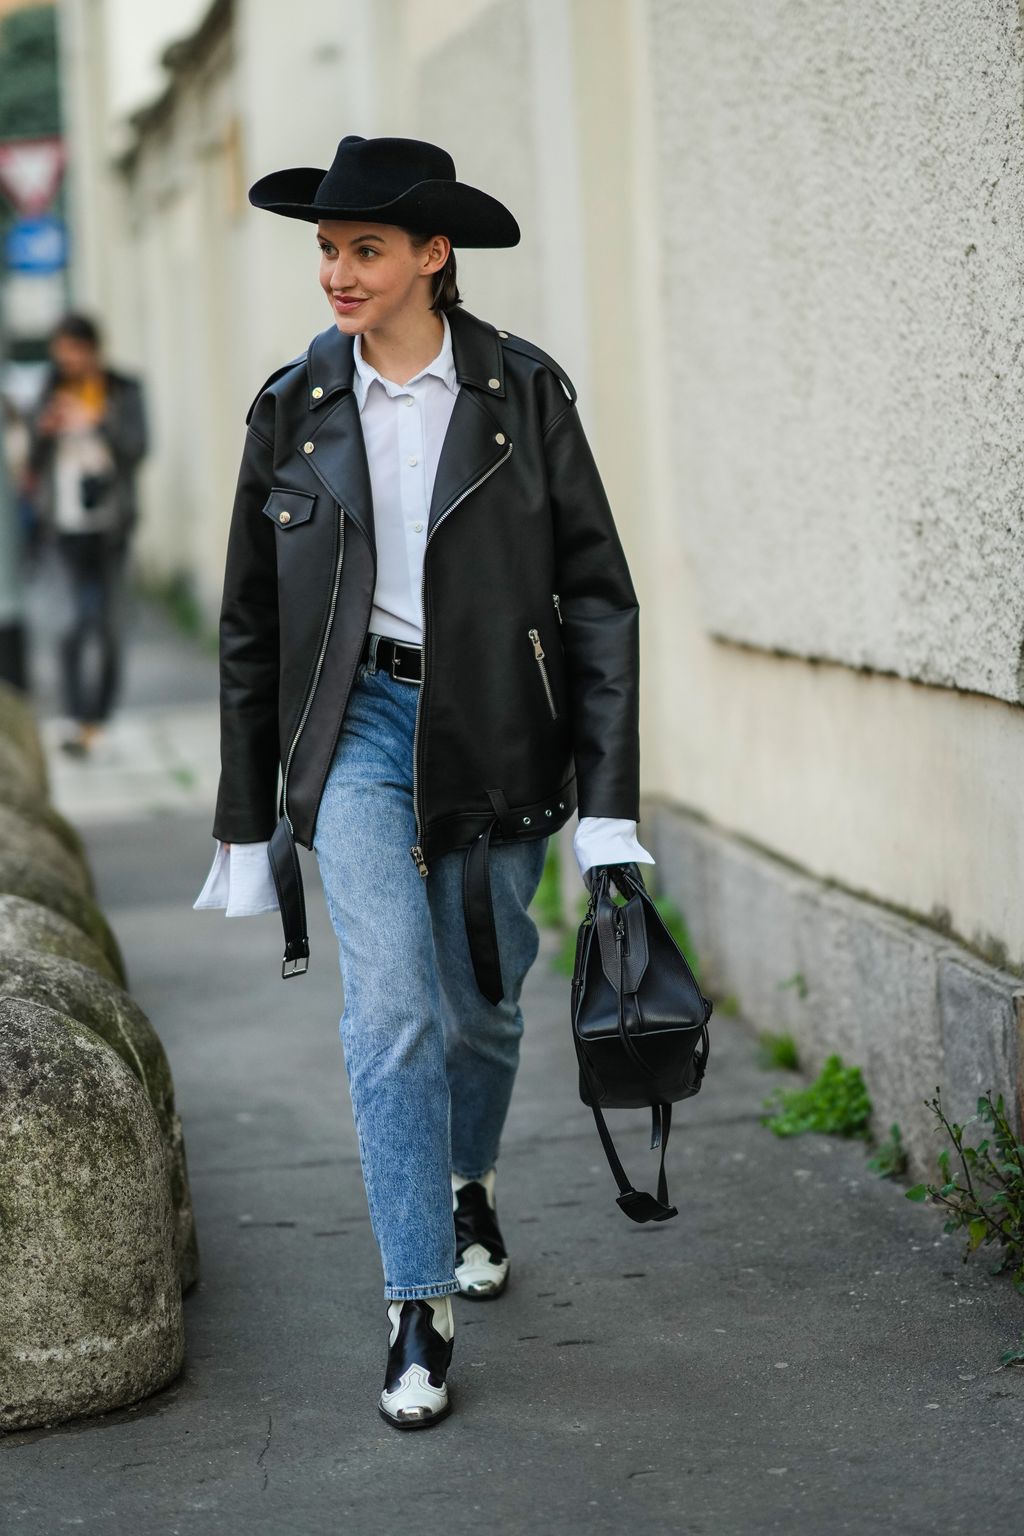 MILAN, ITALY - FEBRUARY 23: A guest wears a black felt hat, a white shirt, a black shiny leather oversized zipper jacket, blue denim cigarette jeans pants, a black shiny leather handbag from Balenciaga, black and white leather yoke and metallic pointed block heels ankle boot, outside the Alberta Ferretti fashion show, during the Milan Fashion Week Fall/Winter 2022/2023 on February 23, 2022 in Milan, Italy. (Photo by Edward Berthelot/Getty Images)